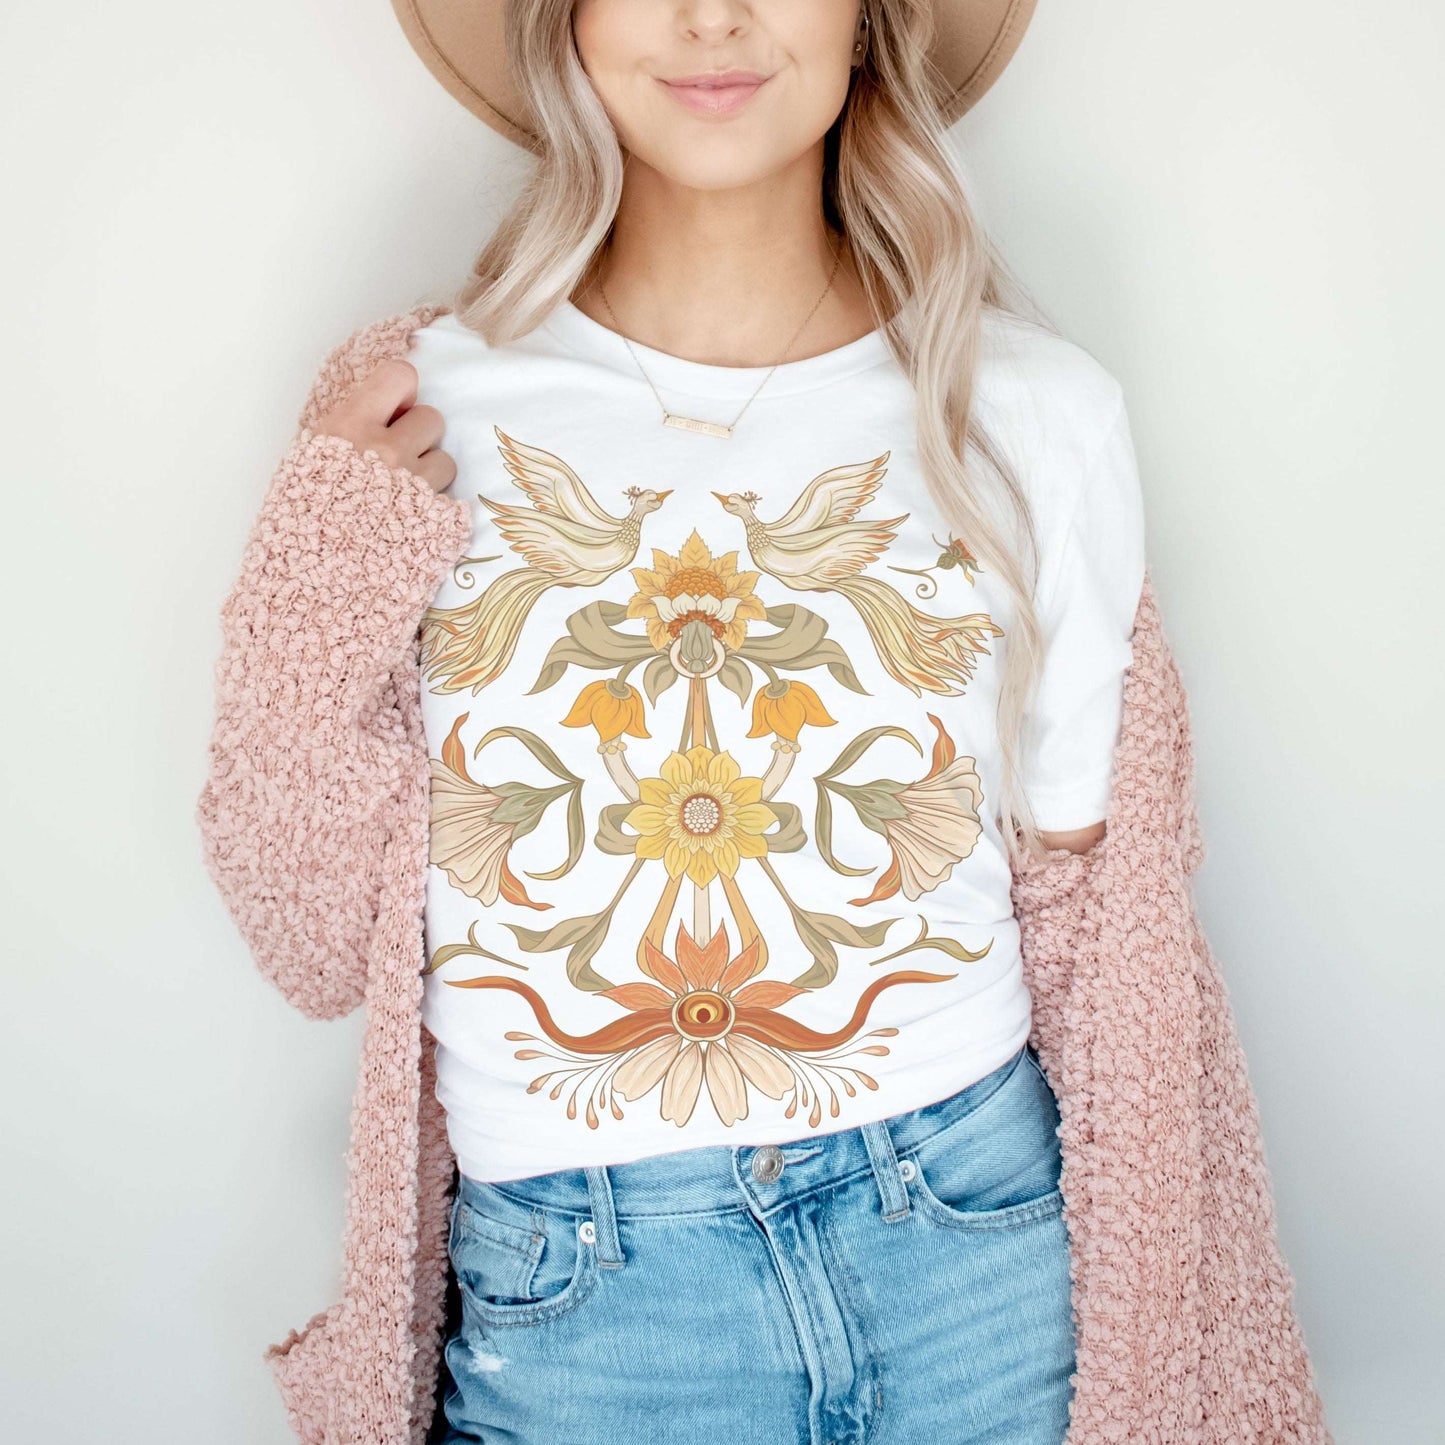 Oversized t-shirt with a art nouveau graphic at the front. Complete with a crew neck silhouette, the unisex fit creates many ways to style this trendy t-shirt. Find it only at Esdee.